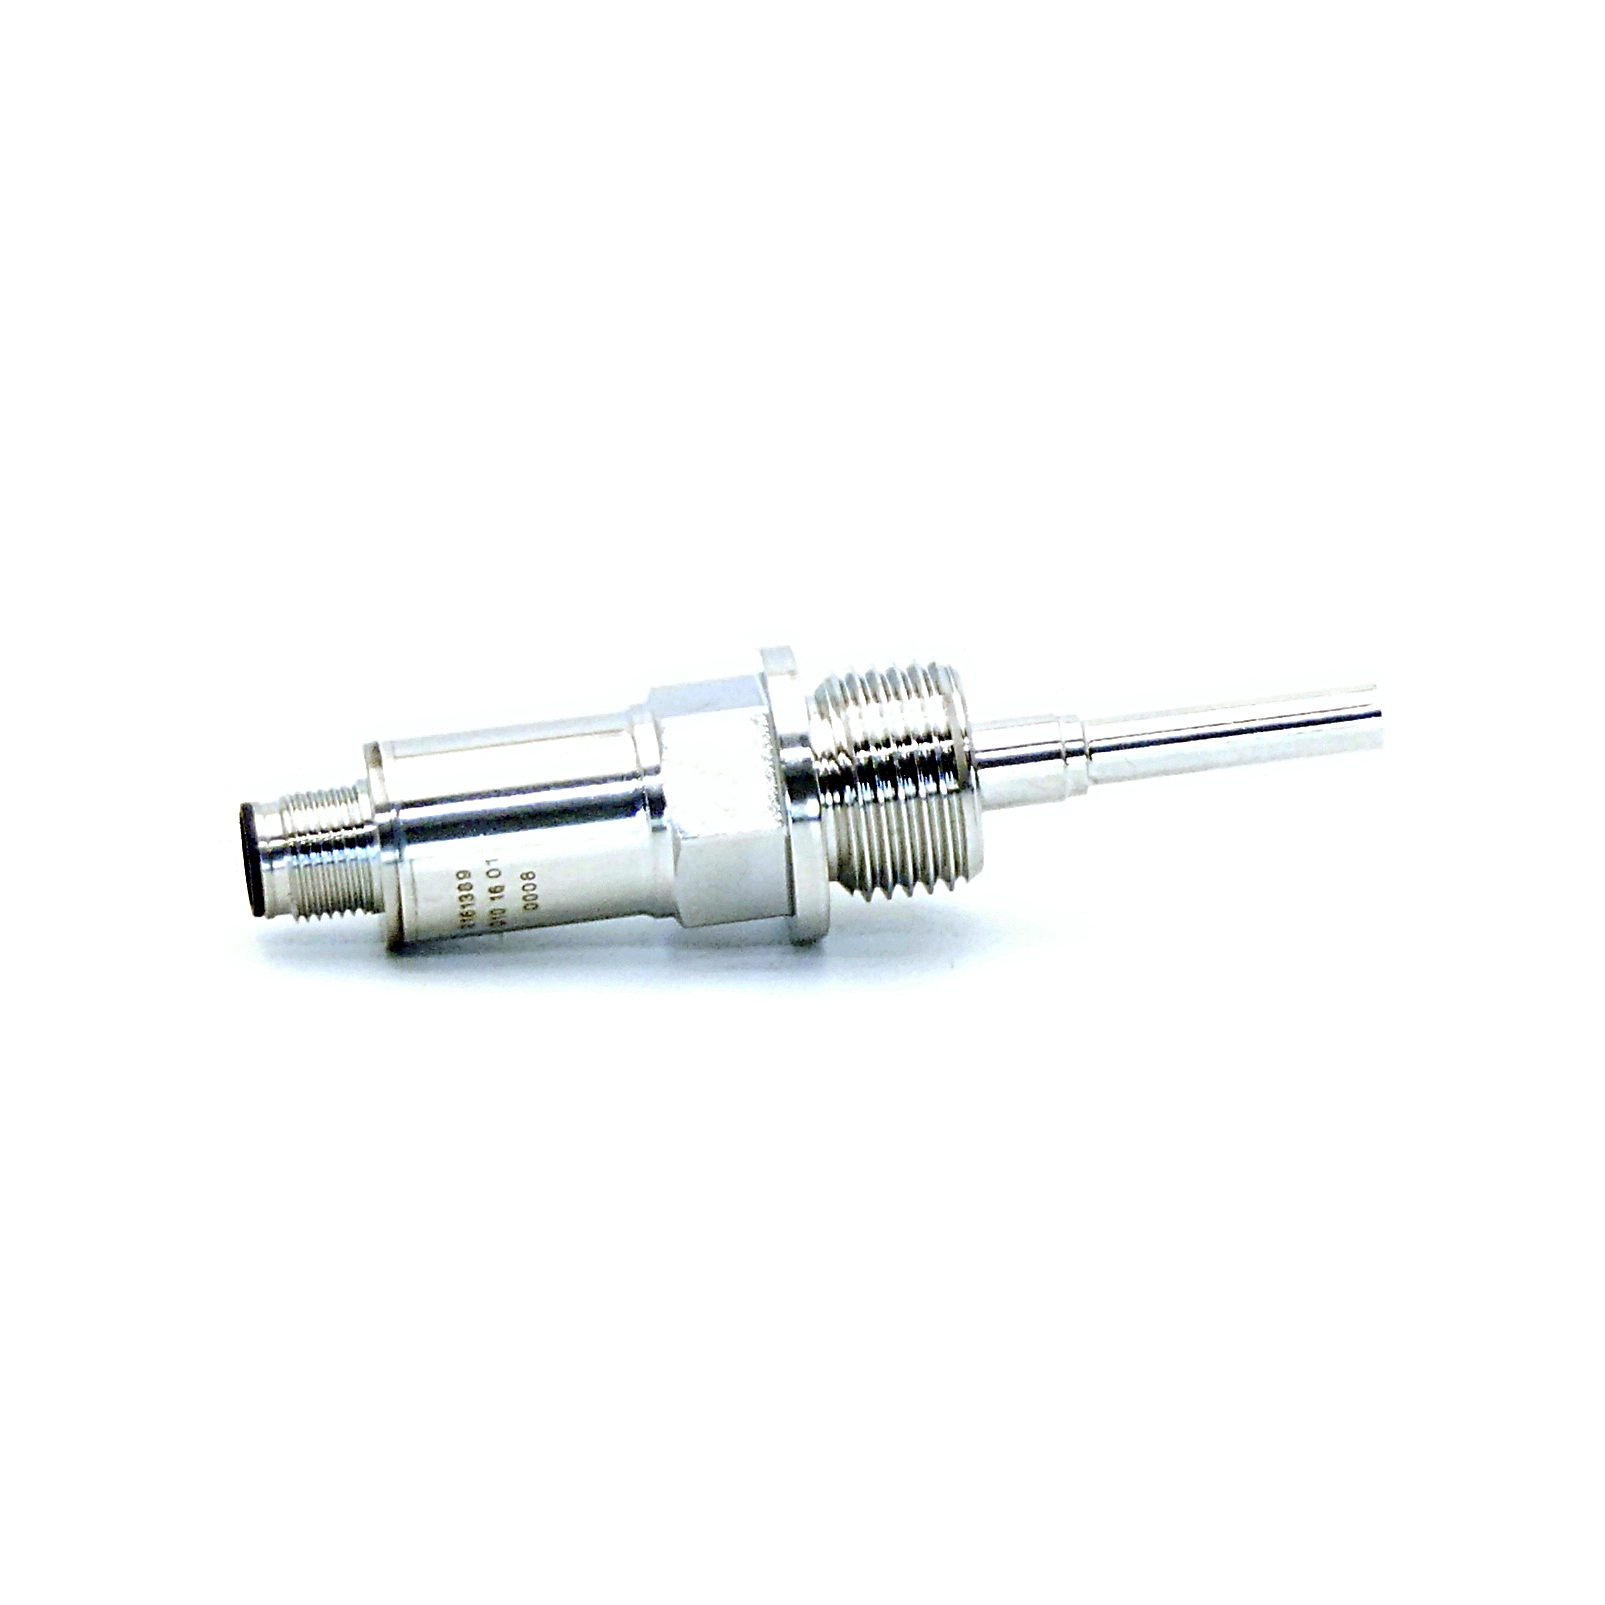 Screw-in resistance thermometer dTRANS T100 